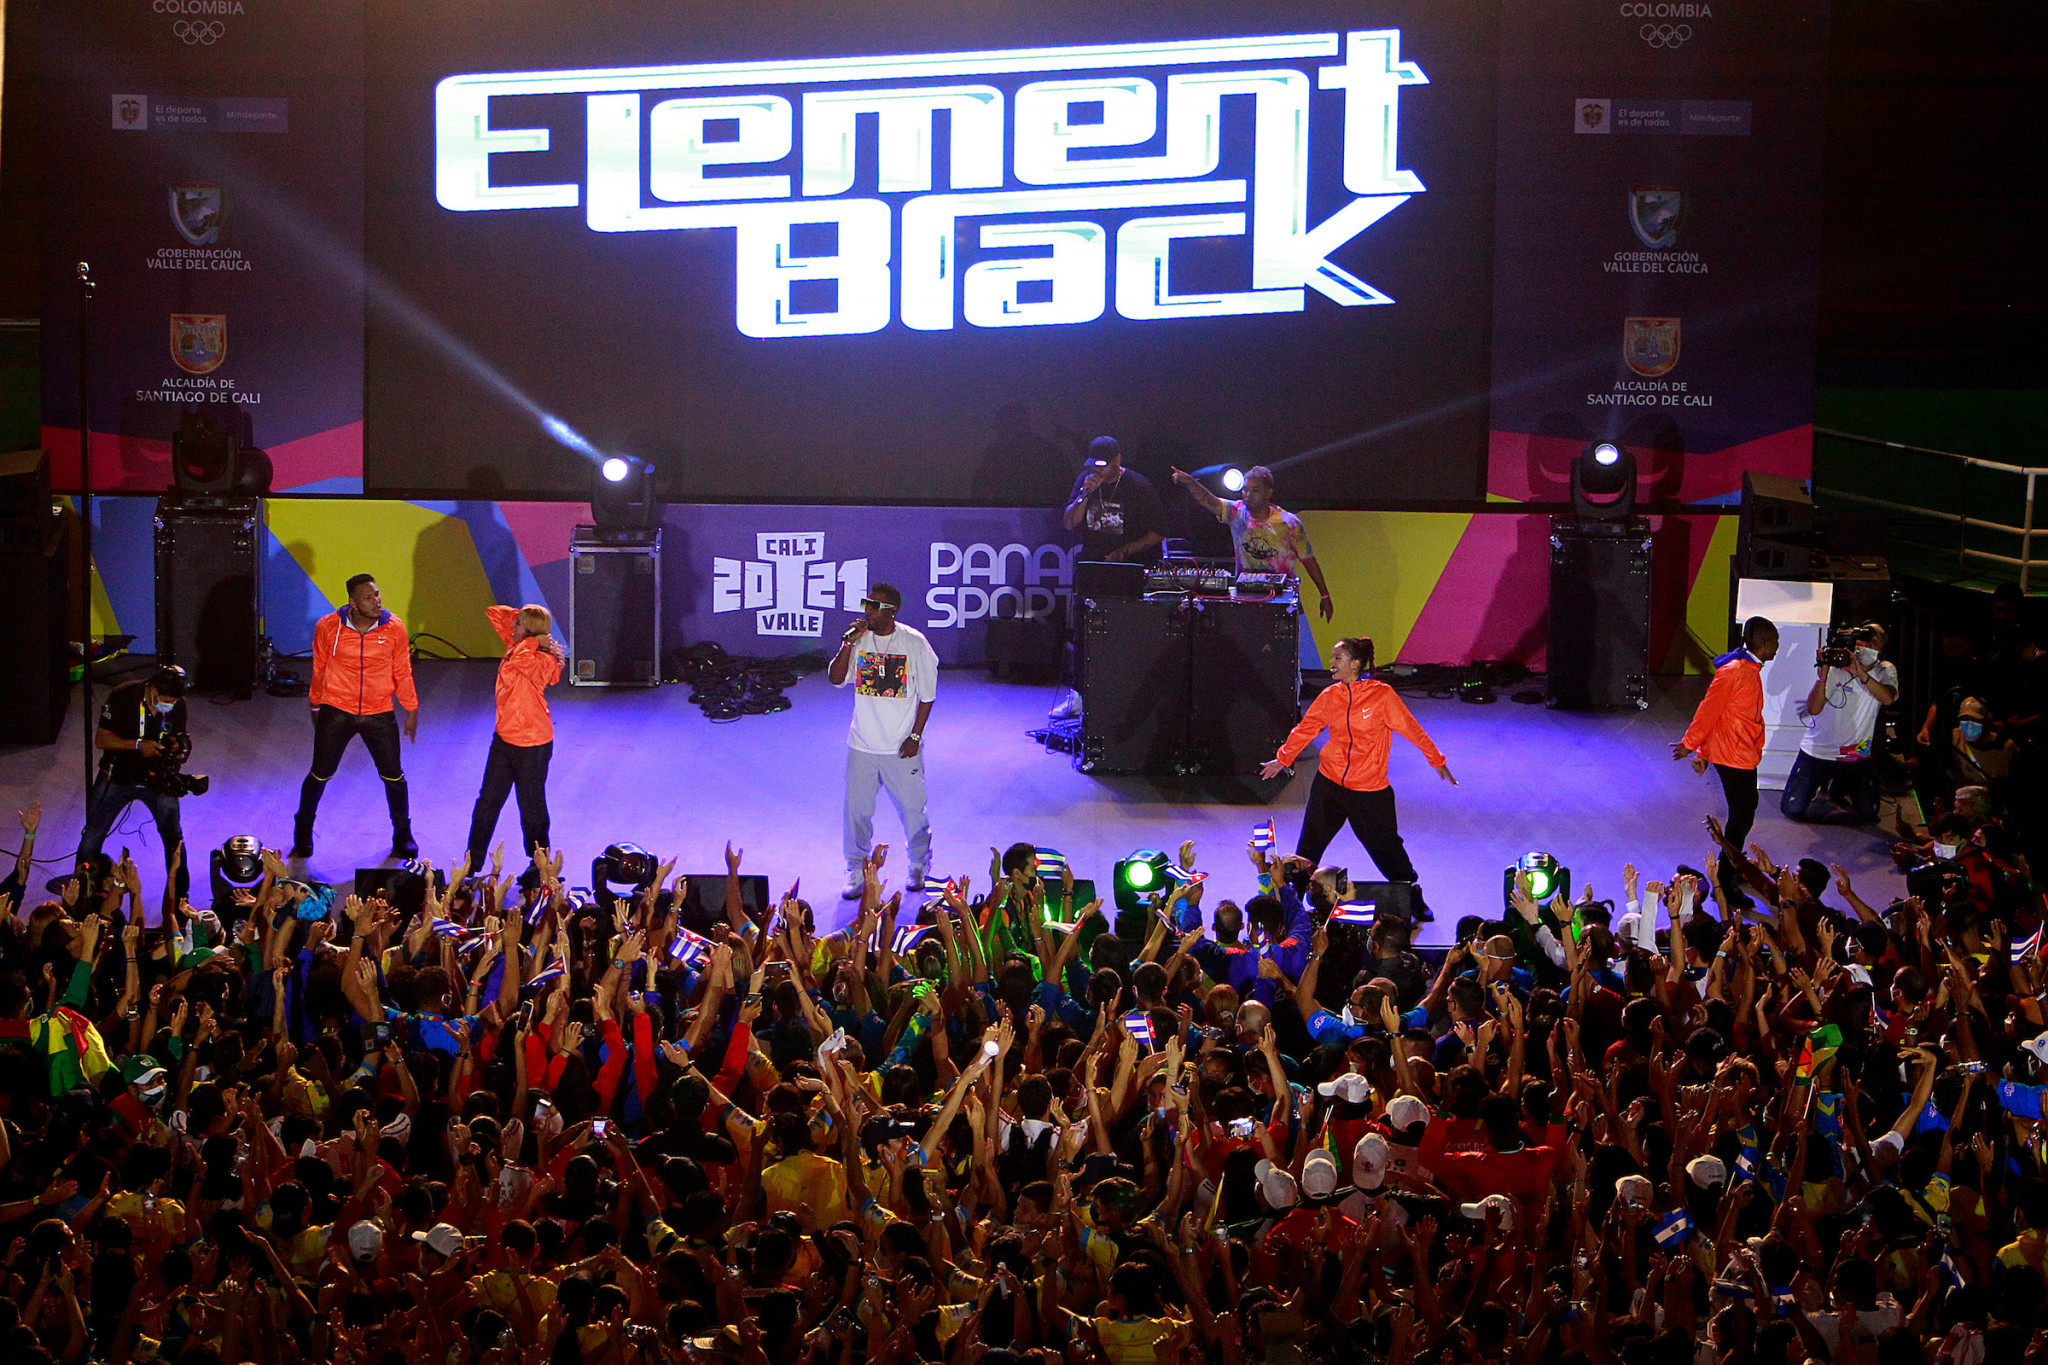 Element Black closed proceedings in Cali, although their performances seemed to divide opinion among attendees ©Agencia.Xpress Media 